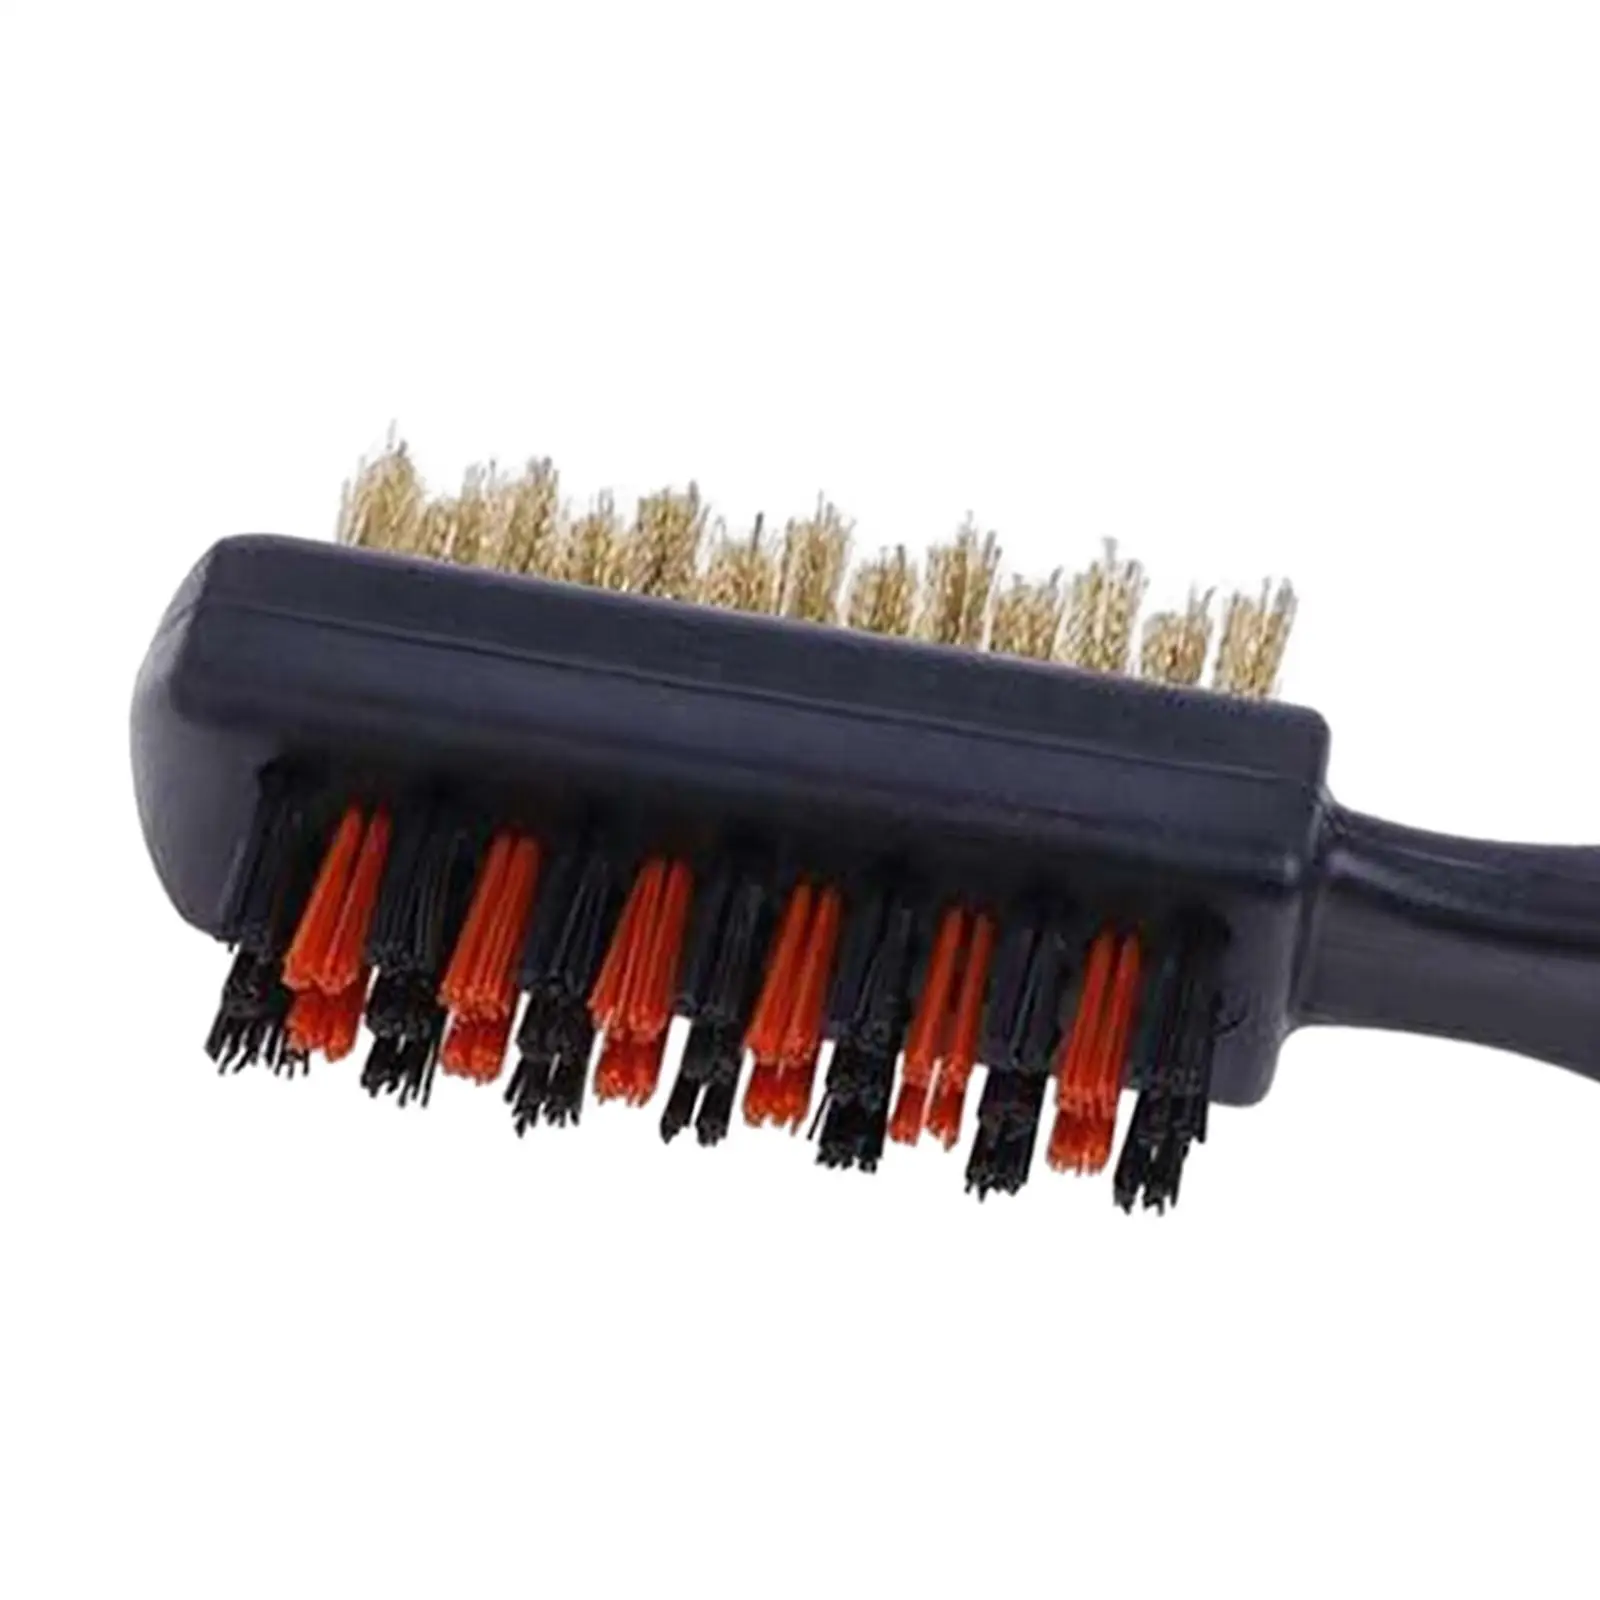 

Dual Sided Club Brush Groove Cleaner Tools Portable with Carabiner Cleaning Brush for Irons Balls Shoes